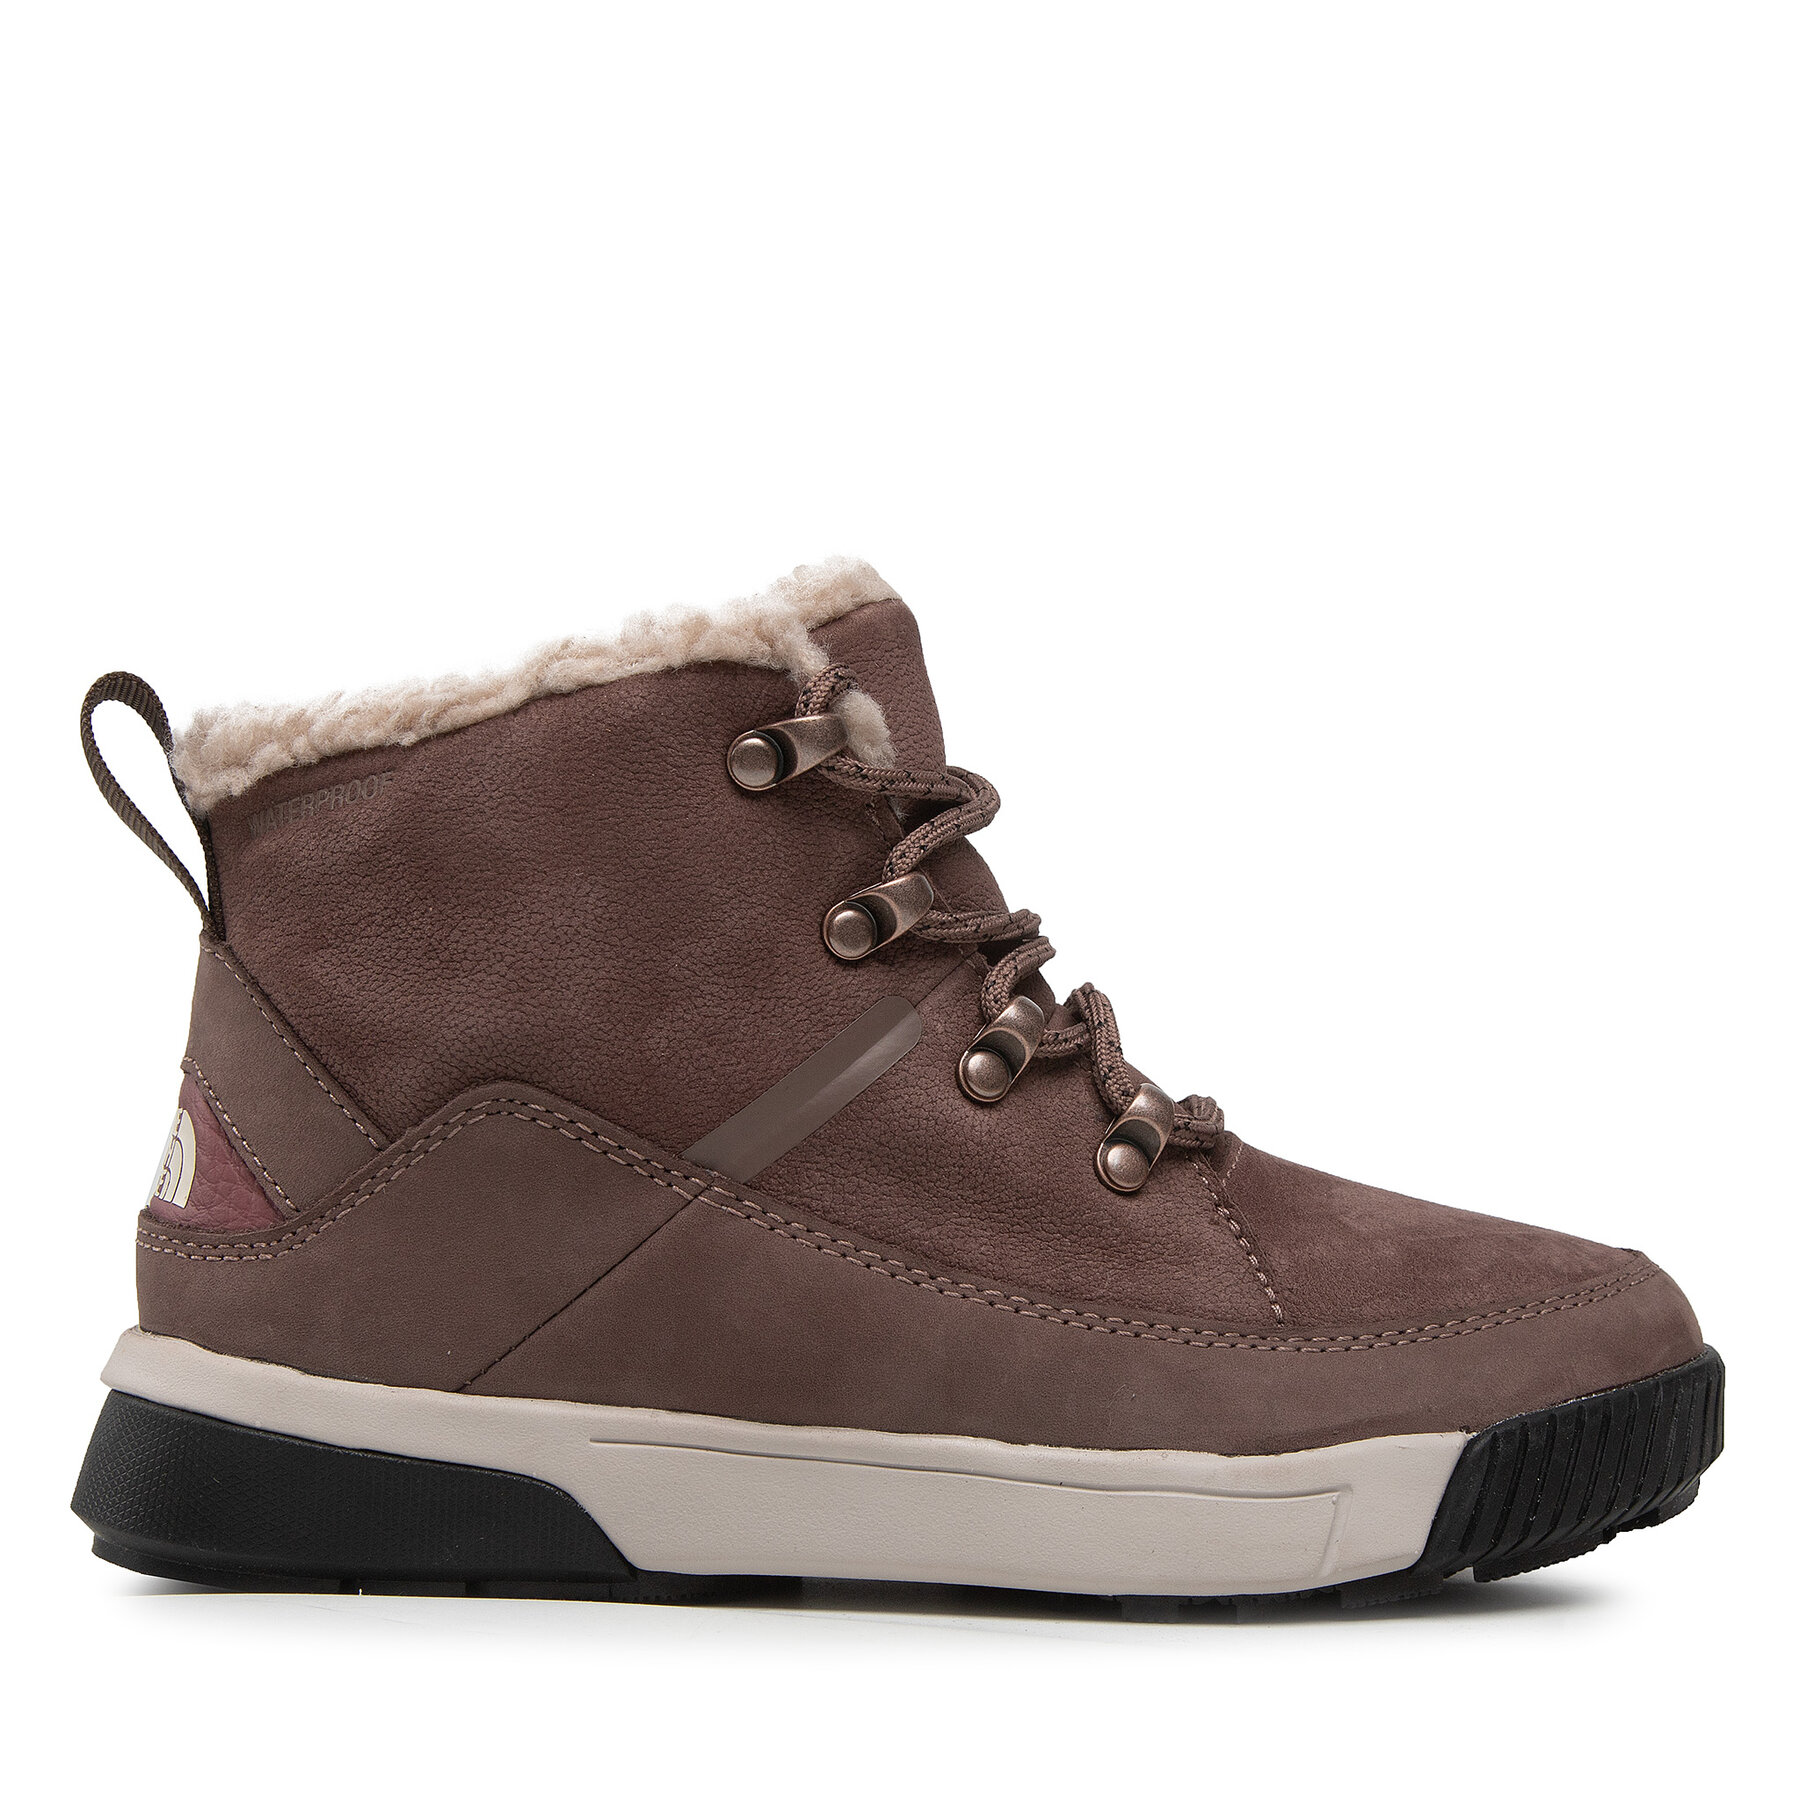 Schnürstiefeletten The North Face Sierra Mid Lace Wp NF0A4T3X7T71 Deep Taupe/Wild Ginger von The North Face